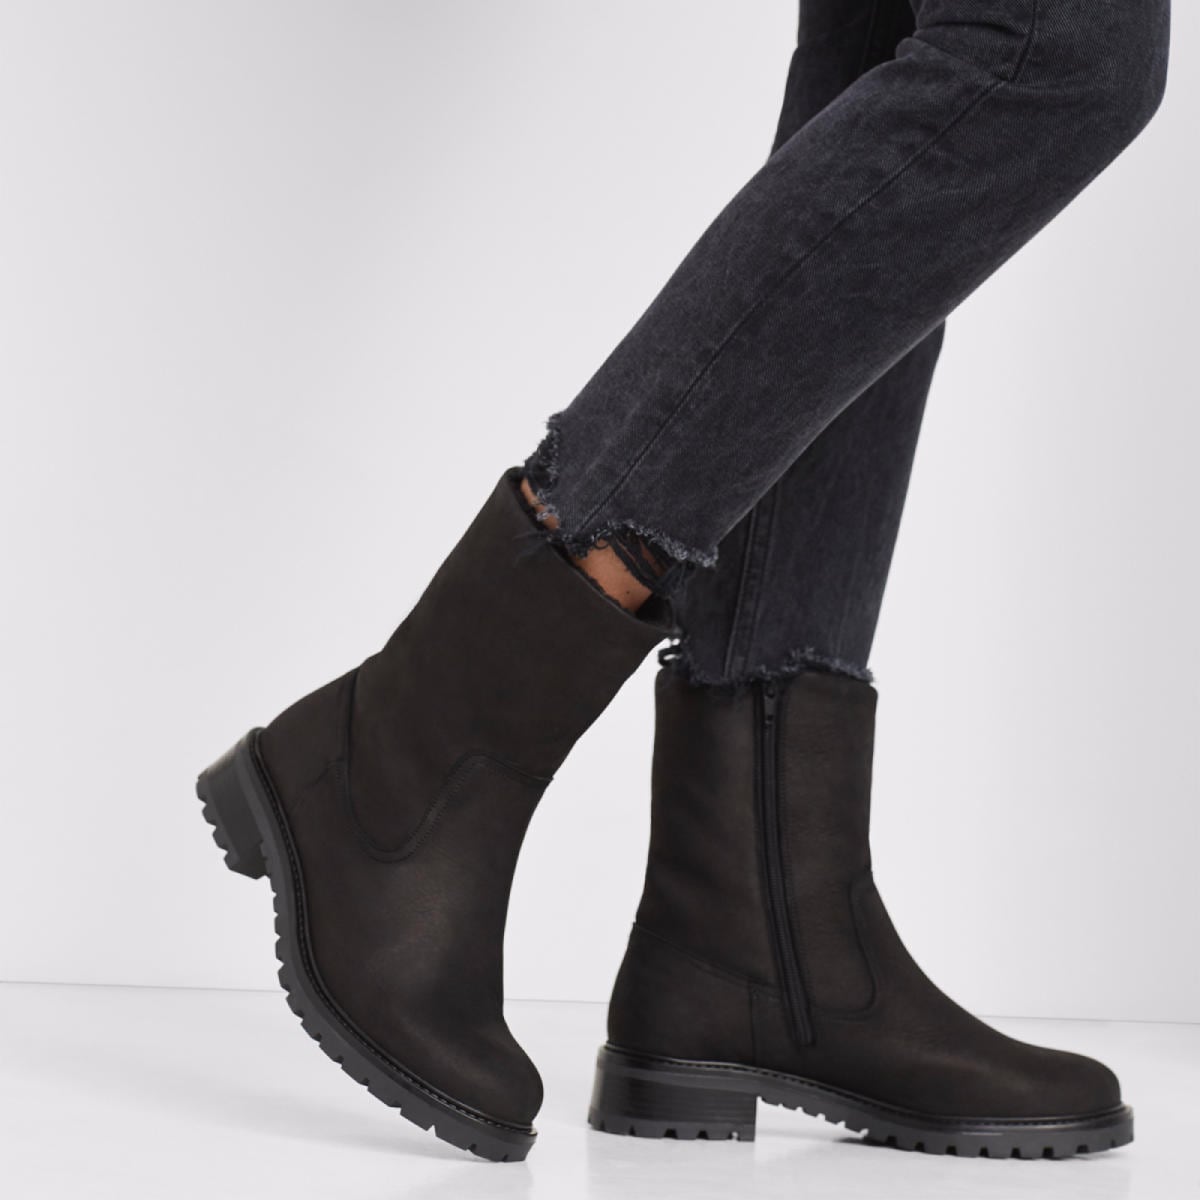 aldo ankle boots canada